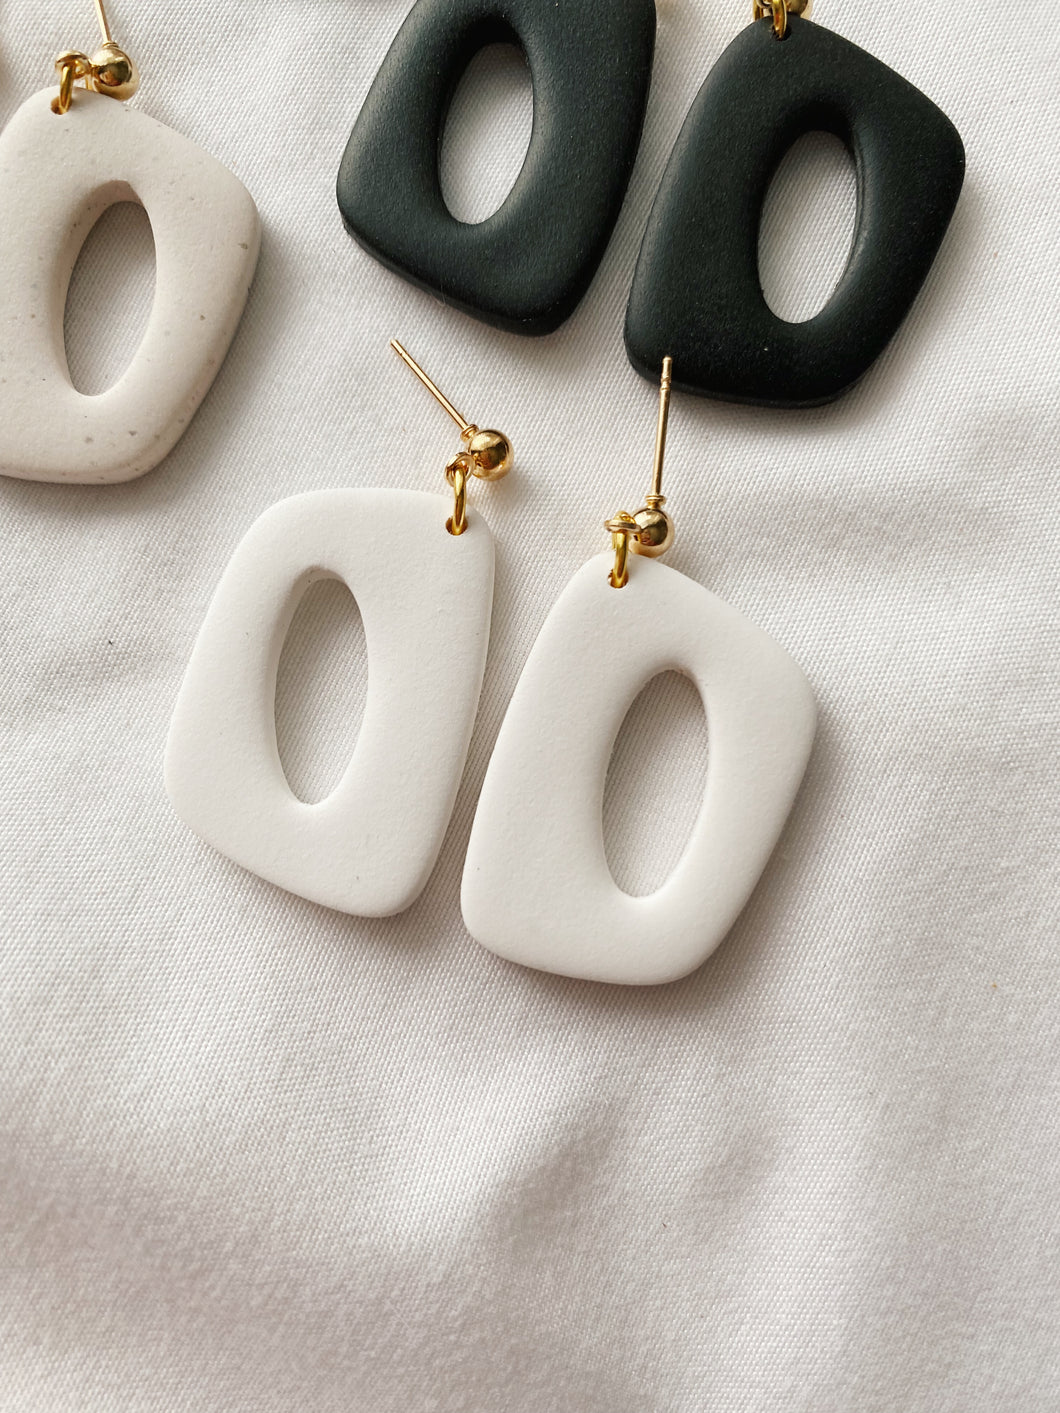 Dani  | The Timeless Collection | Handmade Polymer Clay Earrings